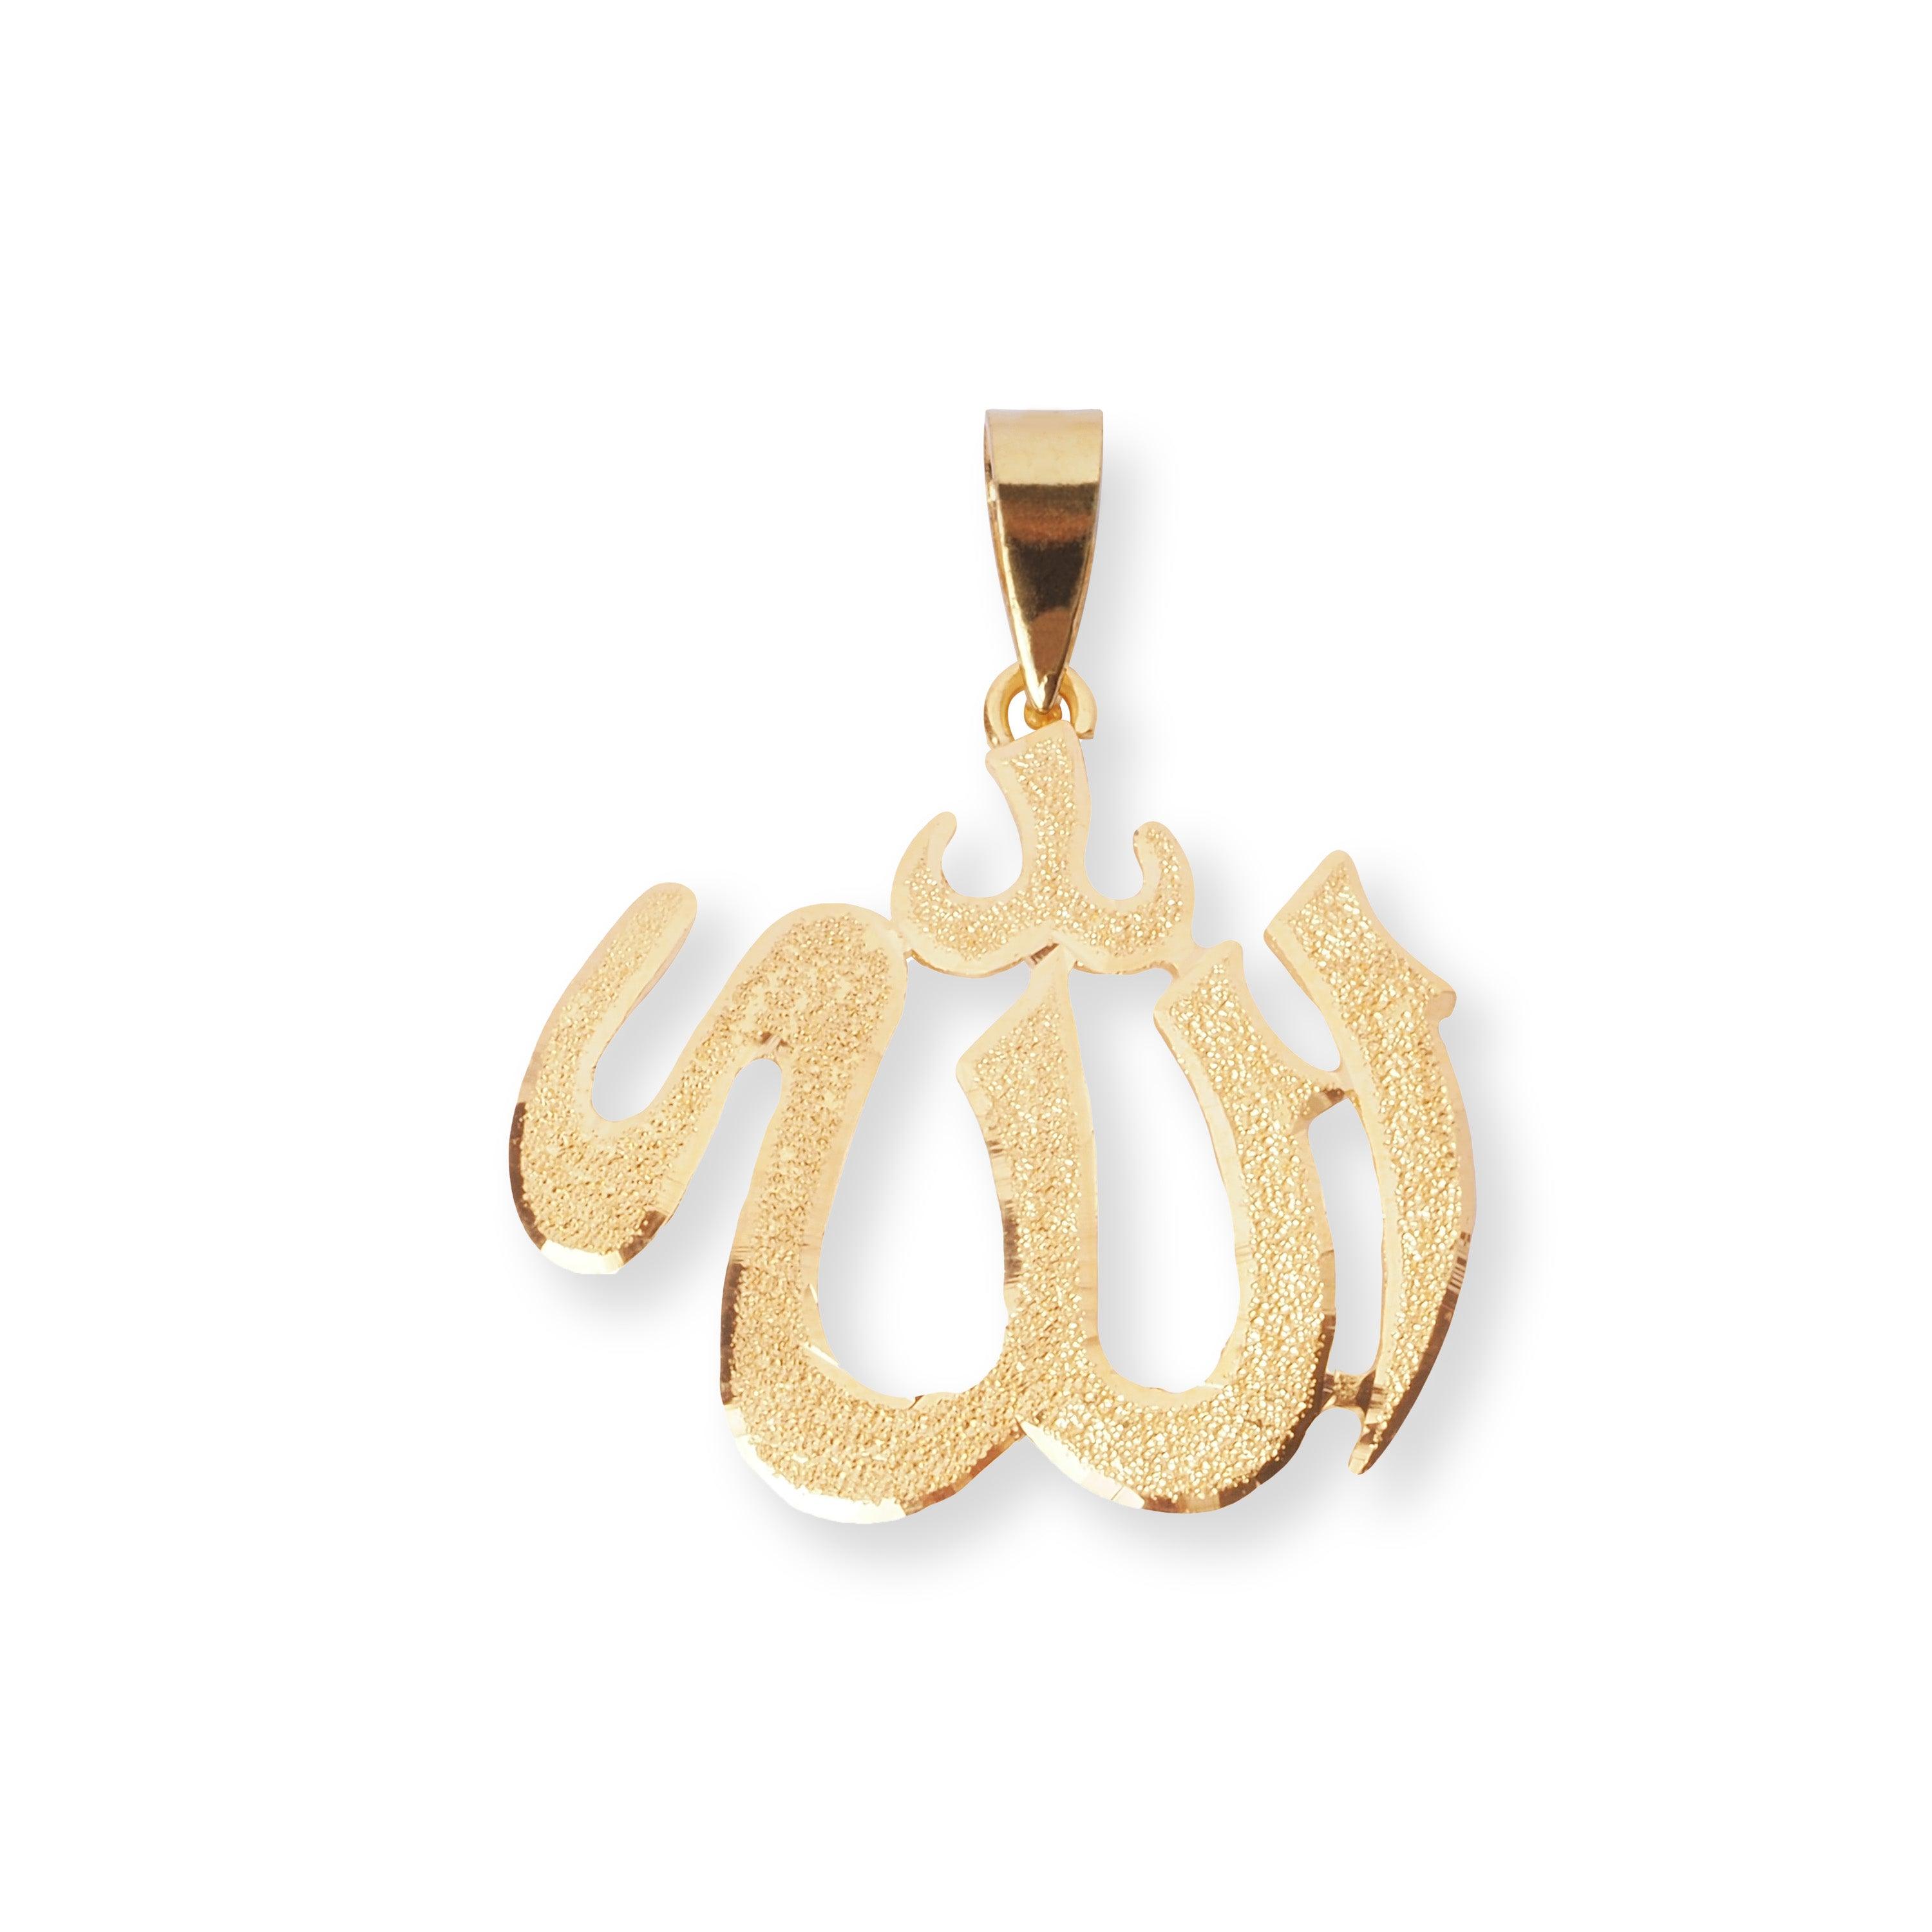 22ct Yellow Gold Islamic Allah Pendant with Brushed Finish P-7977 - Minar Jewellers